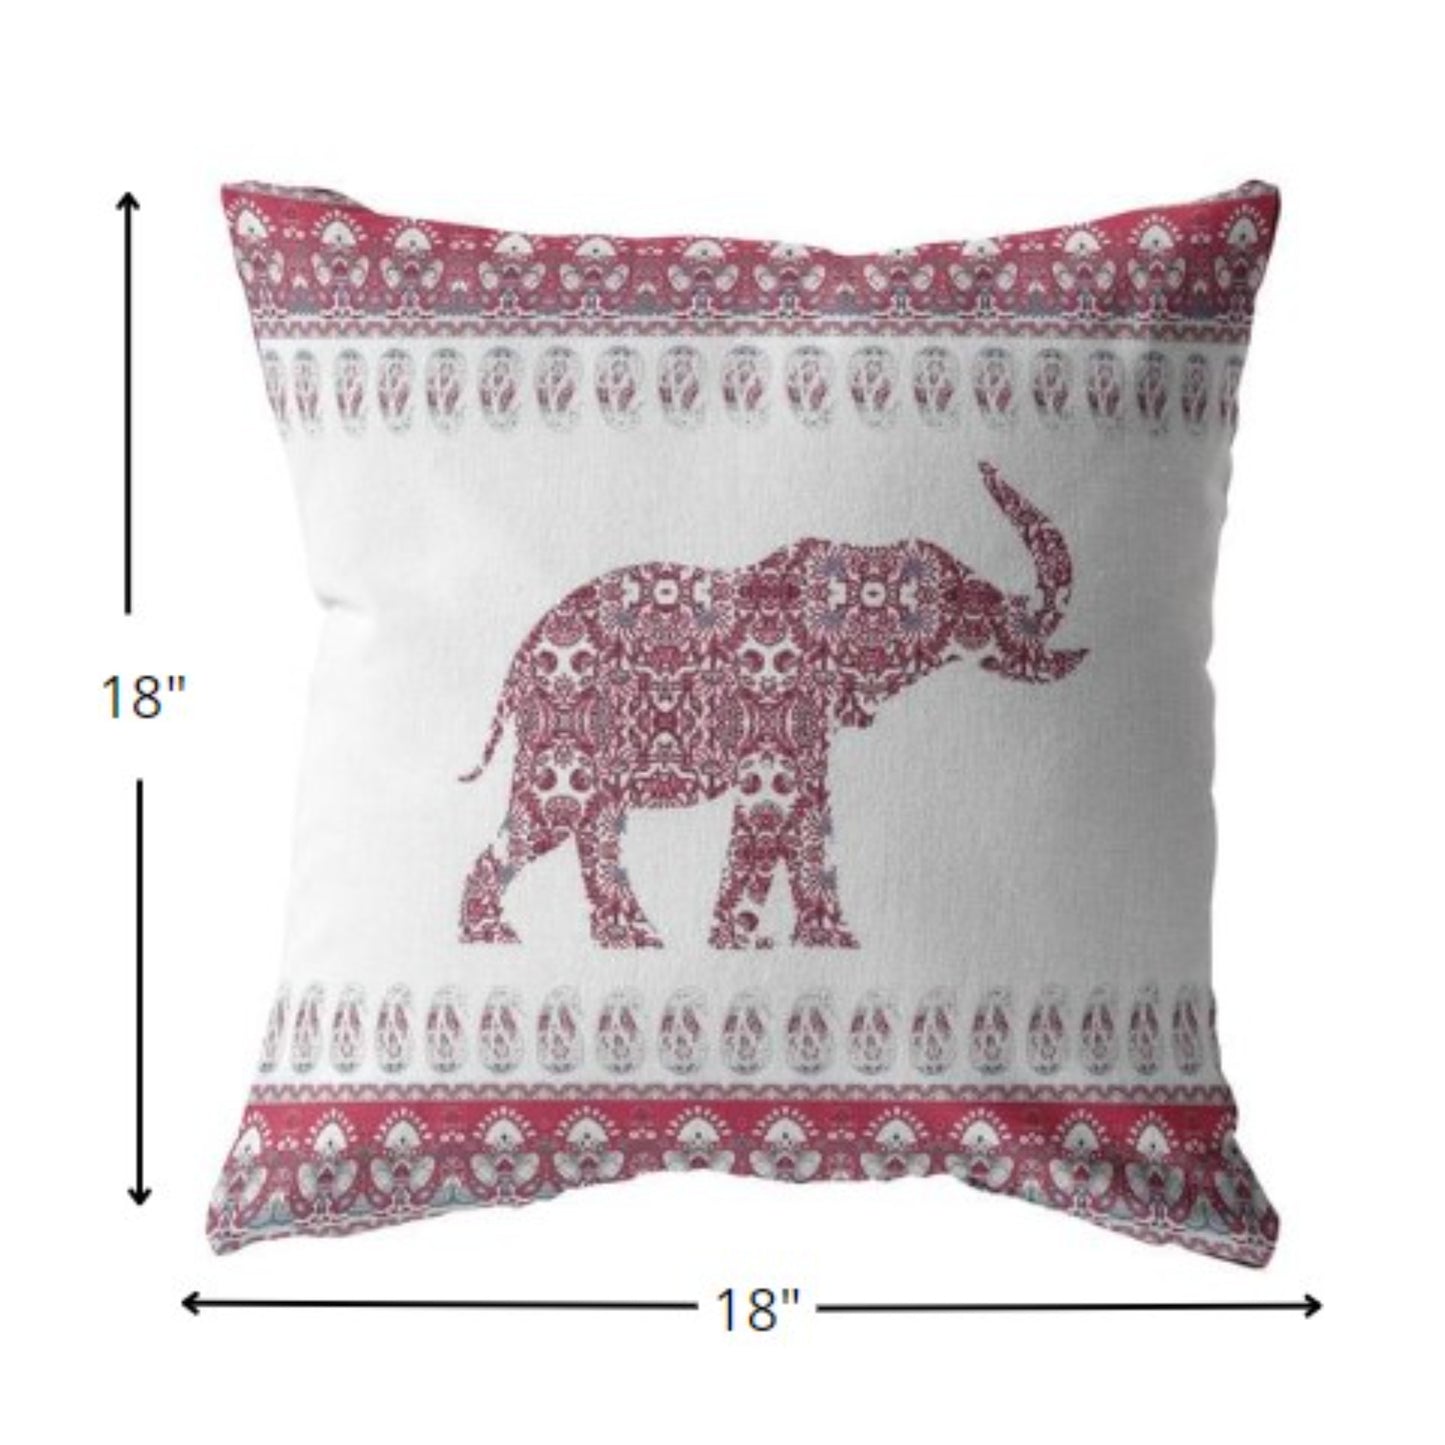 18” Red White Ornate Elephant Zippered Suede Throw Pillow